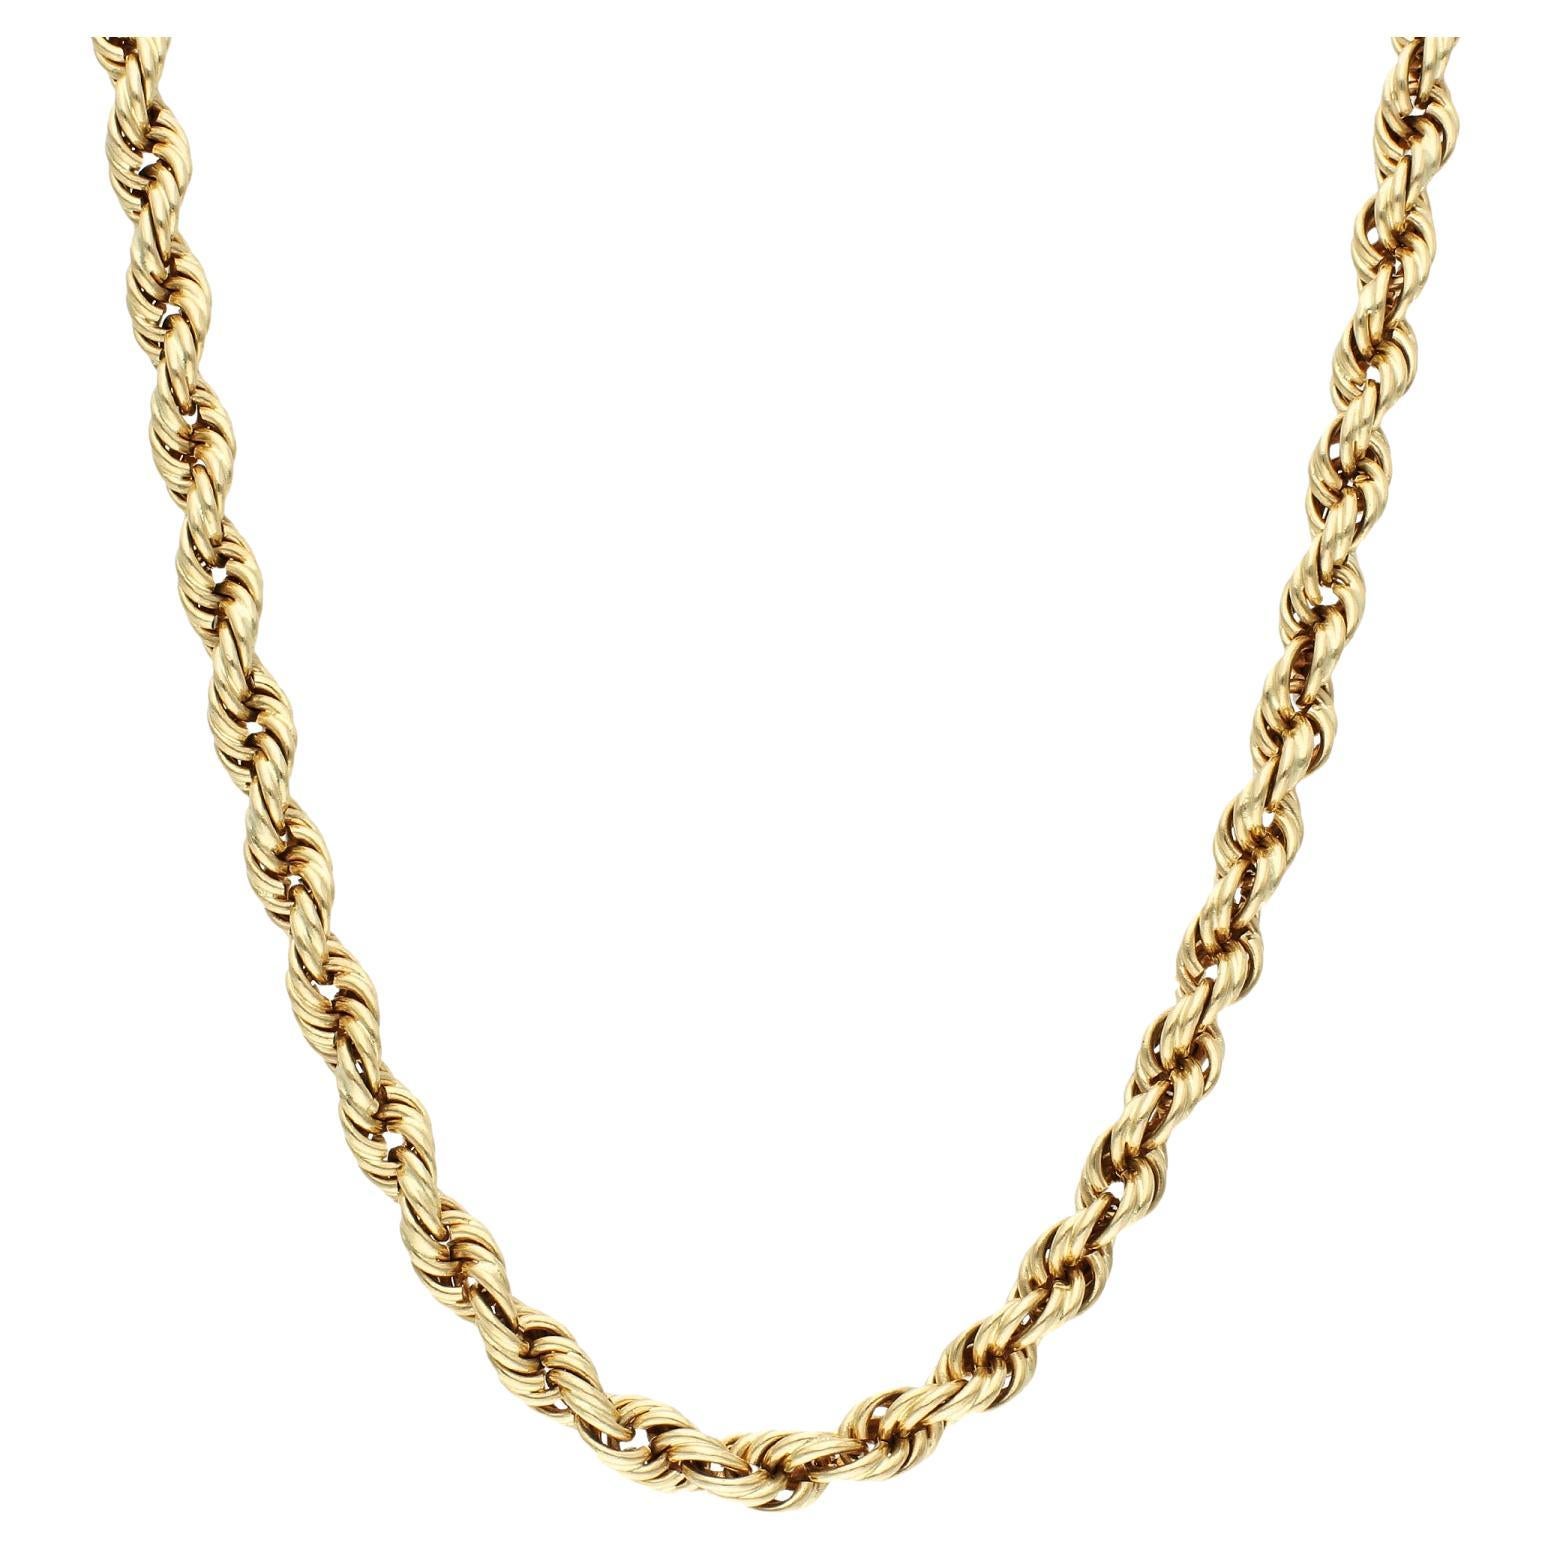  Solid 9ct Yellow Gold 28" Rope Chain 59.80 Grams For Sale